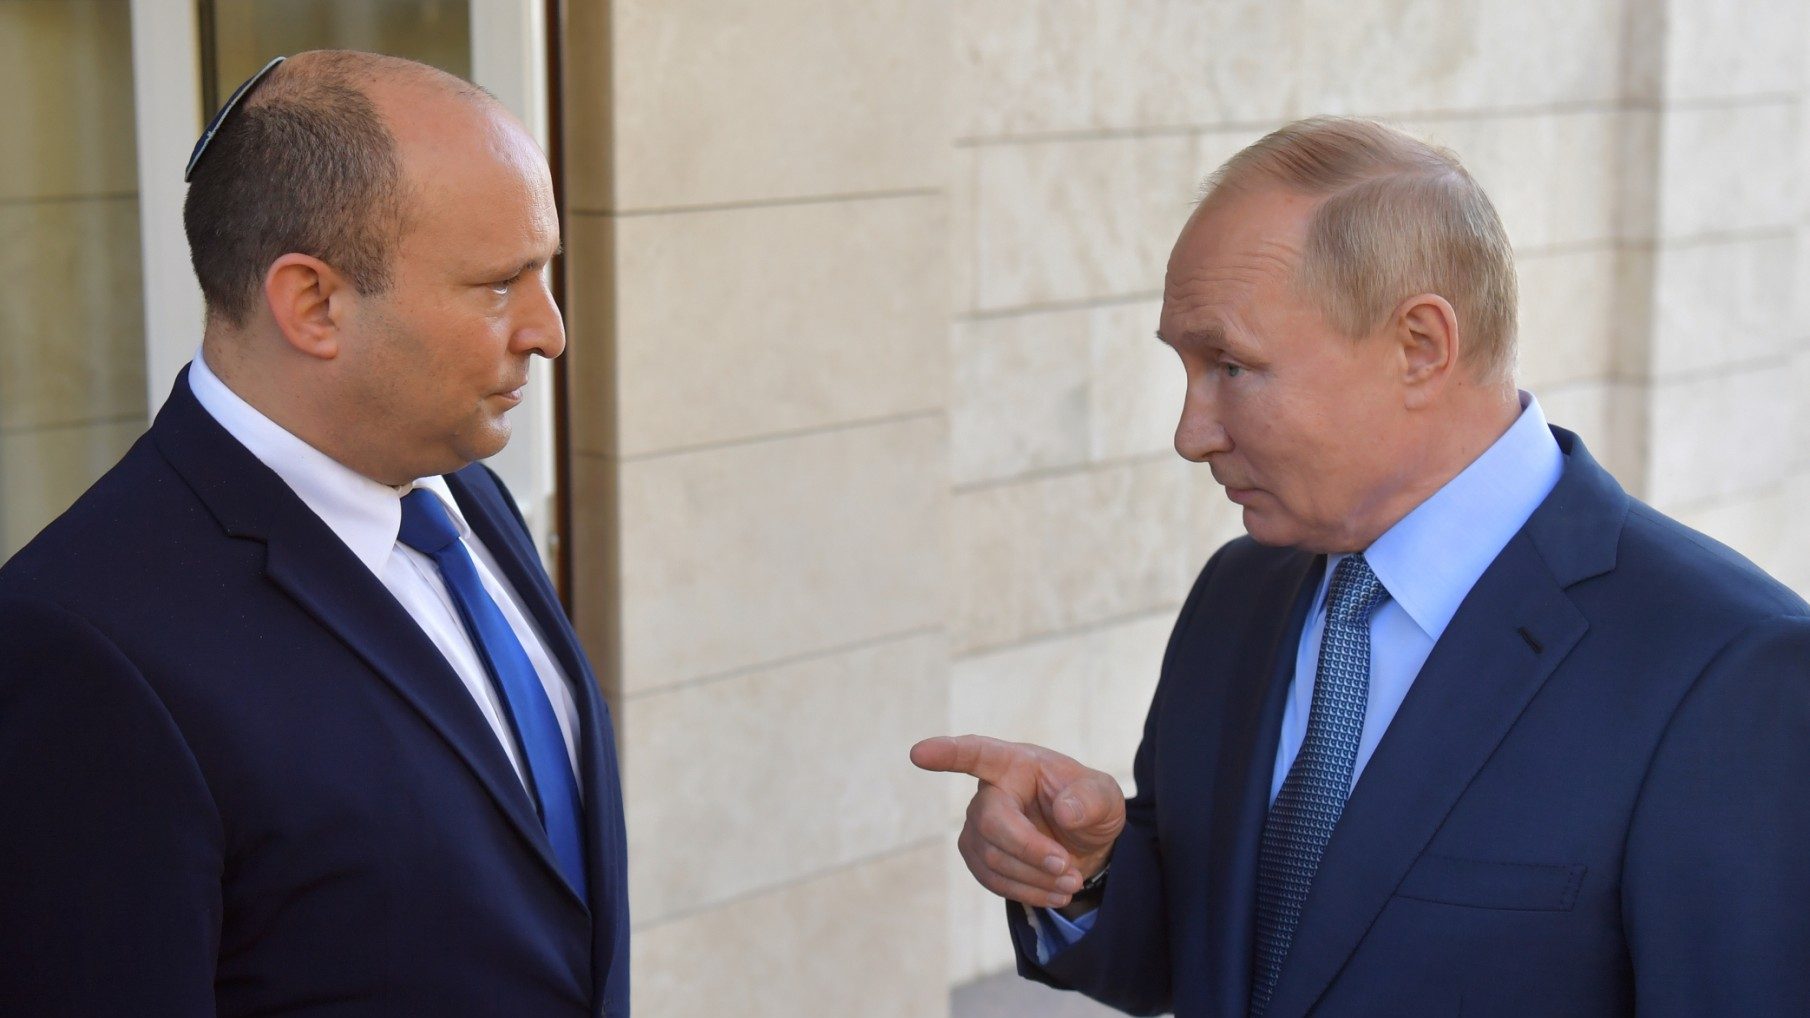 Putin Rejected Mediation on Ukraine: Israel Fears Mixing Issues in Syria